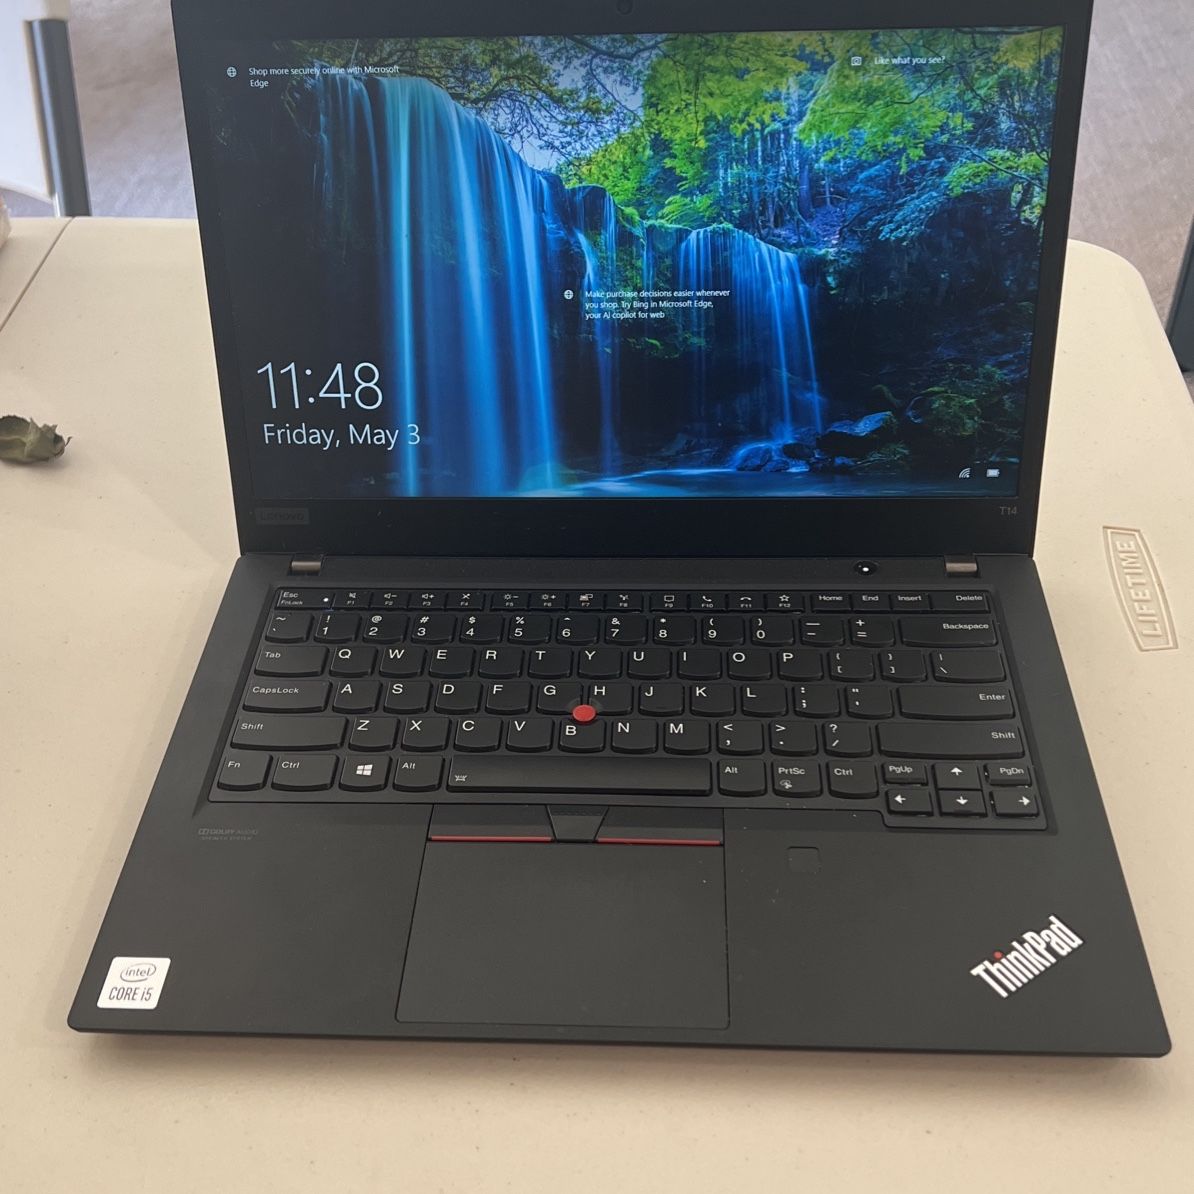 Super Reliable ThinkPad With Touchscreen!